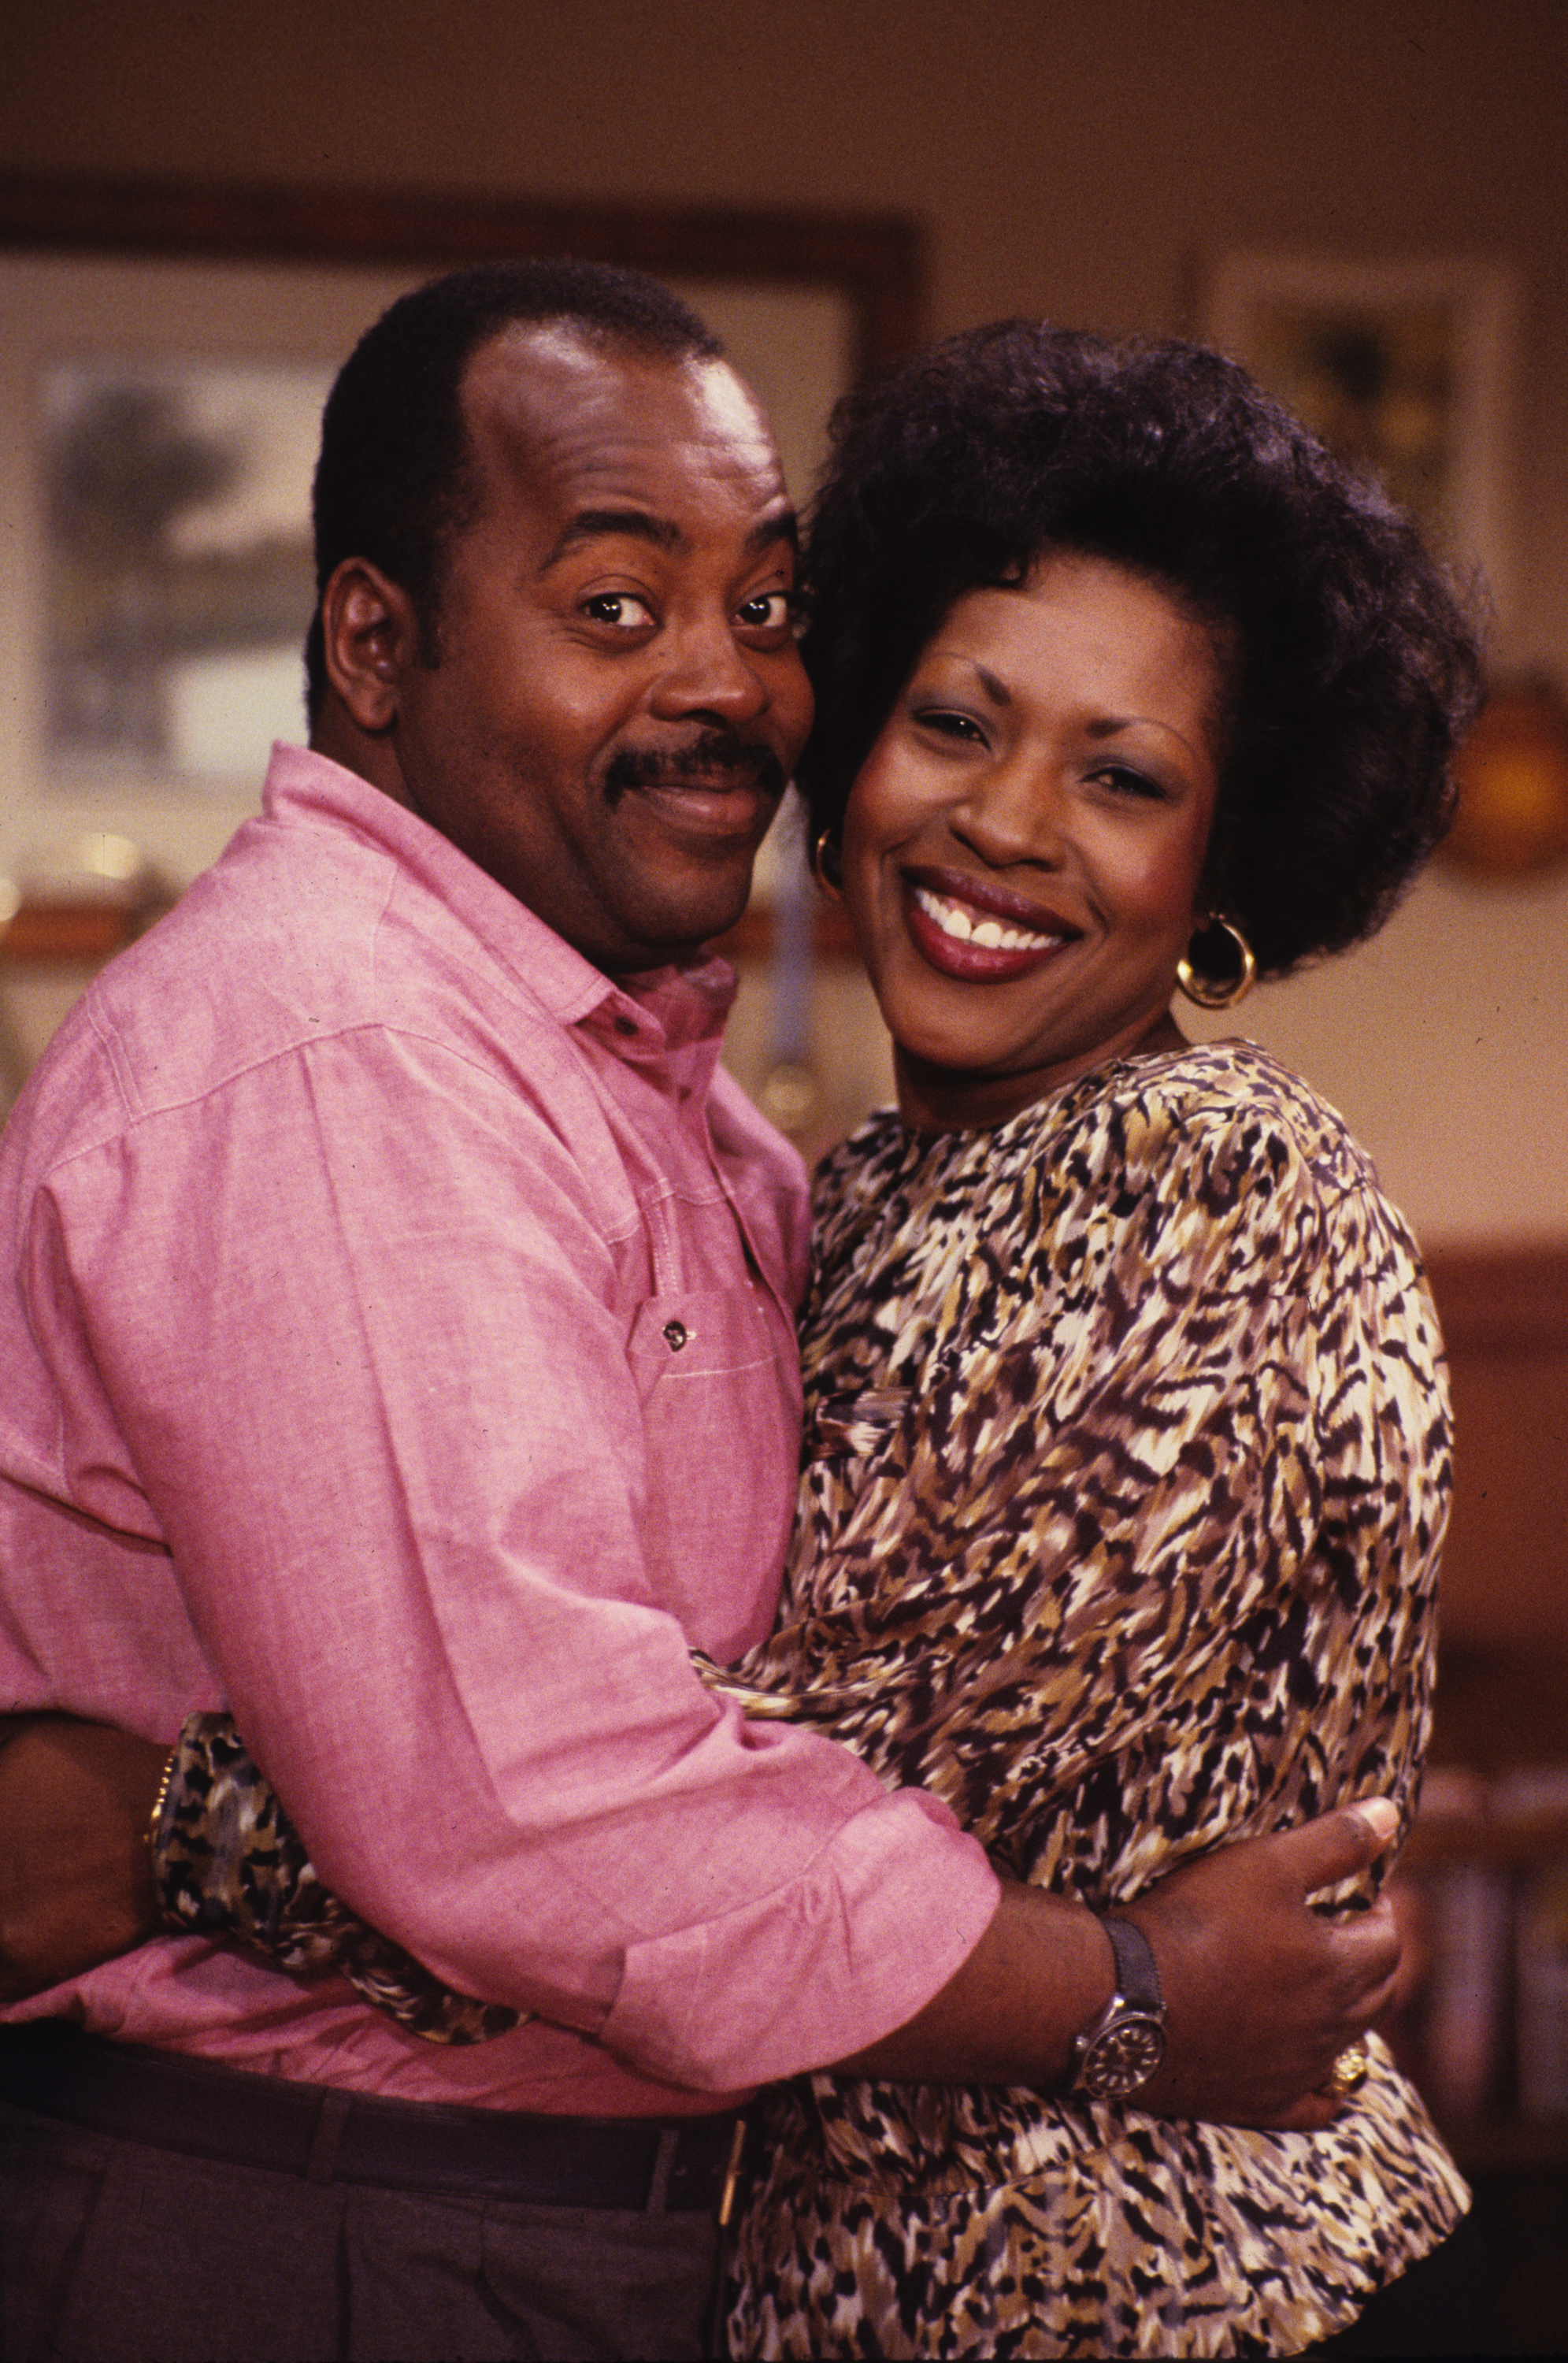 Chicago police officer Carl Winslow (Reginald VelJohnson) and his wife, Harriette (Jo Marie Payton), circa 1989 | Source: Getty Images